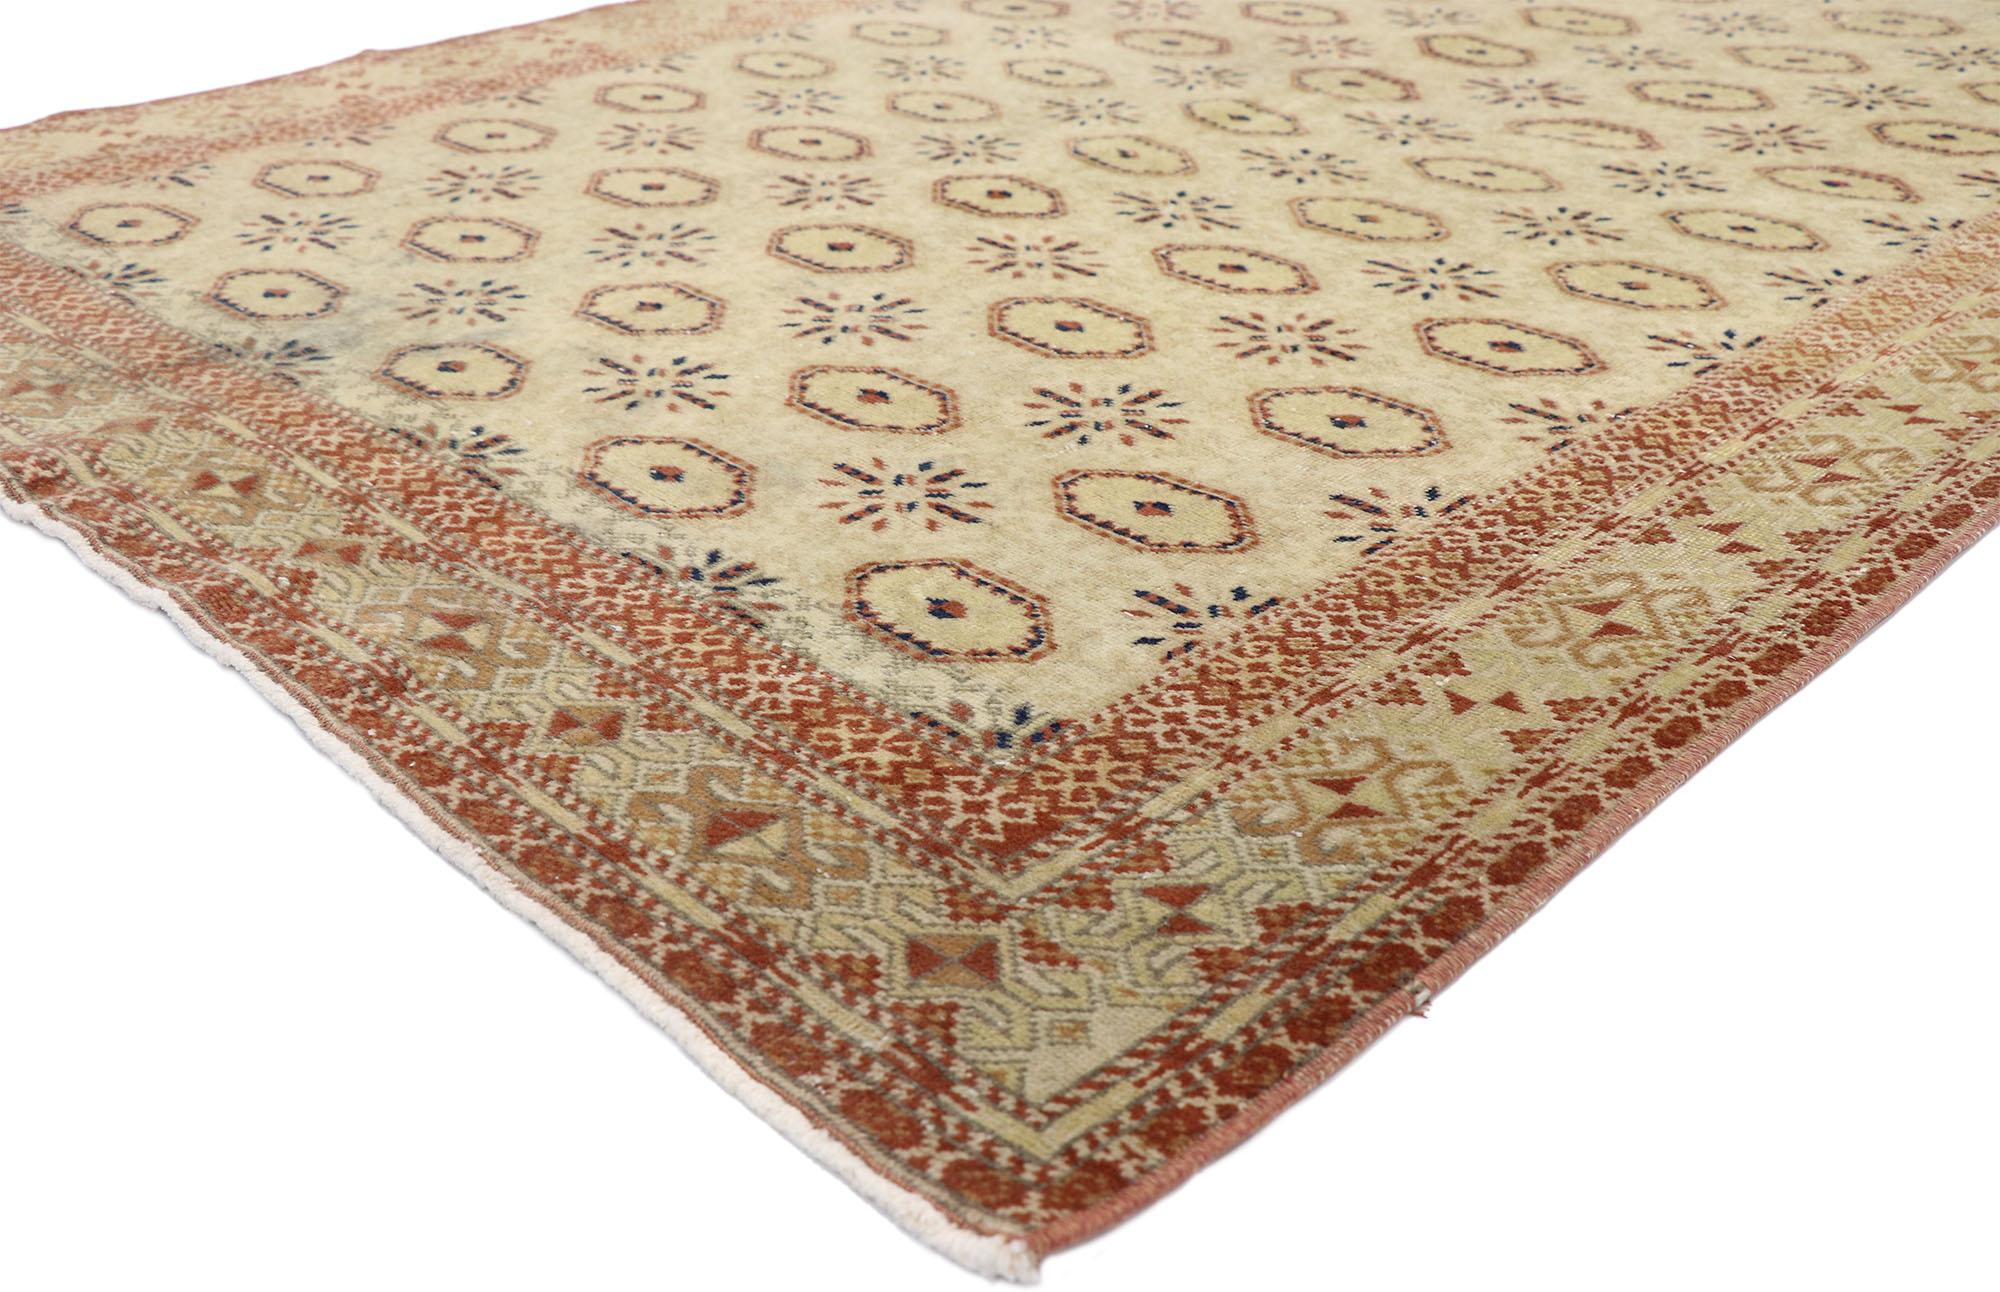 52606, distressed vintage Turkish Sivas rug with Turkmen design and Edwardian style. This hand knotted wool distressed vintage Turkish Sivas rug features an all-over geometric pattern spread across an abrashed neutral field. The composition of this